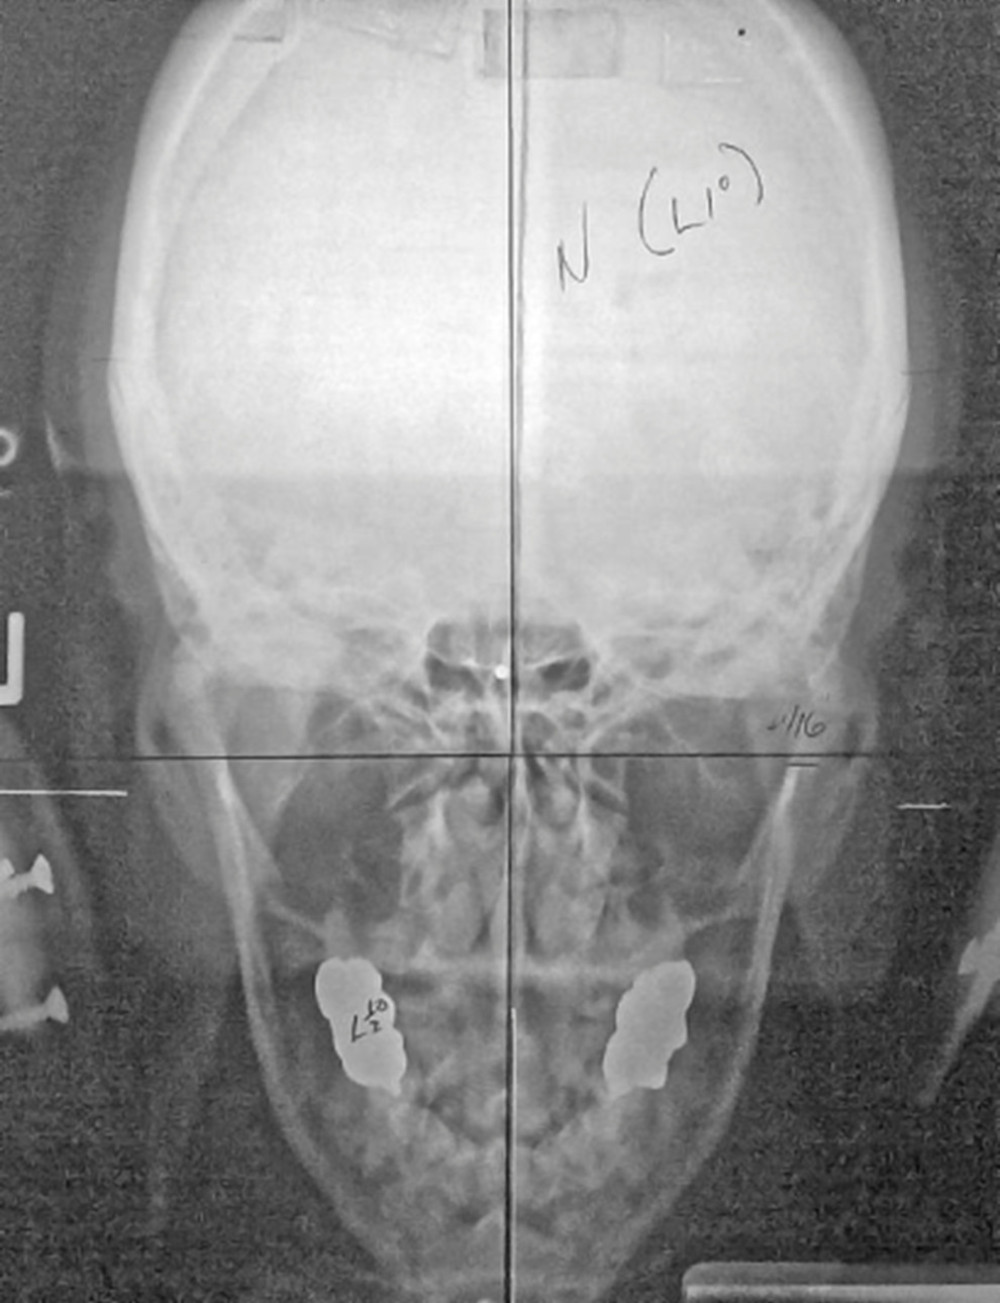 The post adjustment frontal (nasium) radiograph depicts the return of the cervical spine to the y-axis directly underneath the skull and effective reduction of the acute angle between the atlas and the skull. N (normal atlas-skull relationship), L1 (describes tilt of the head to the left 1 degree off the vertical axis, not a misalignment component).